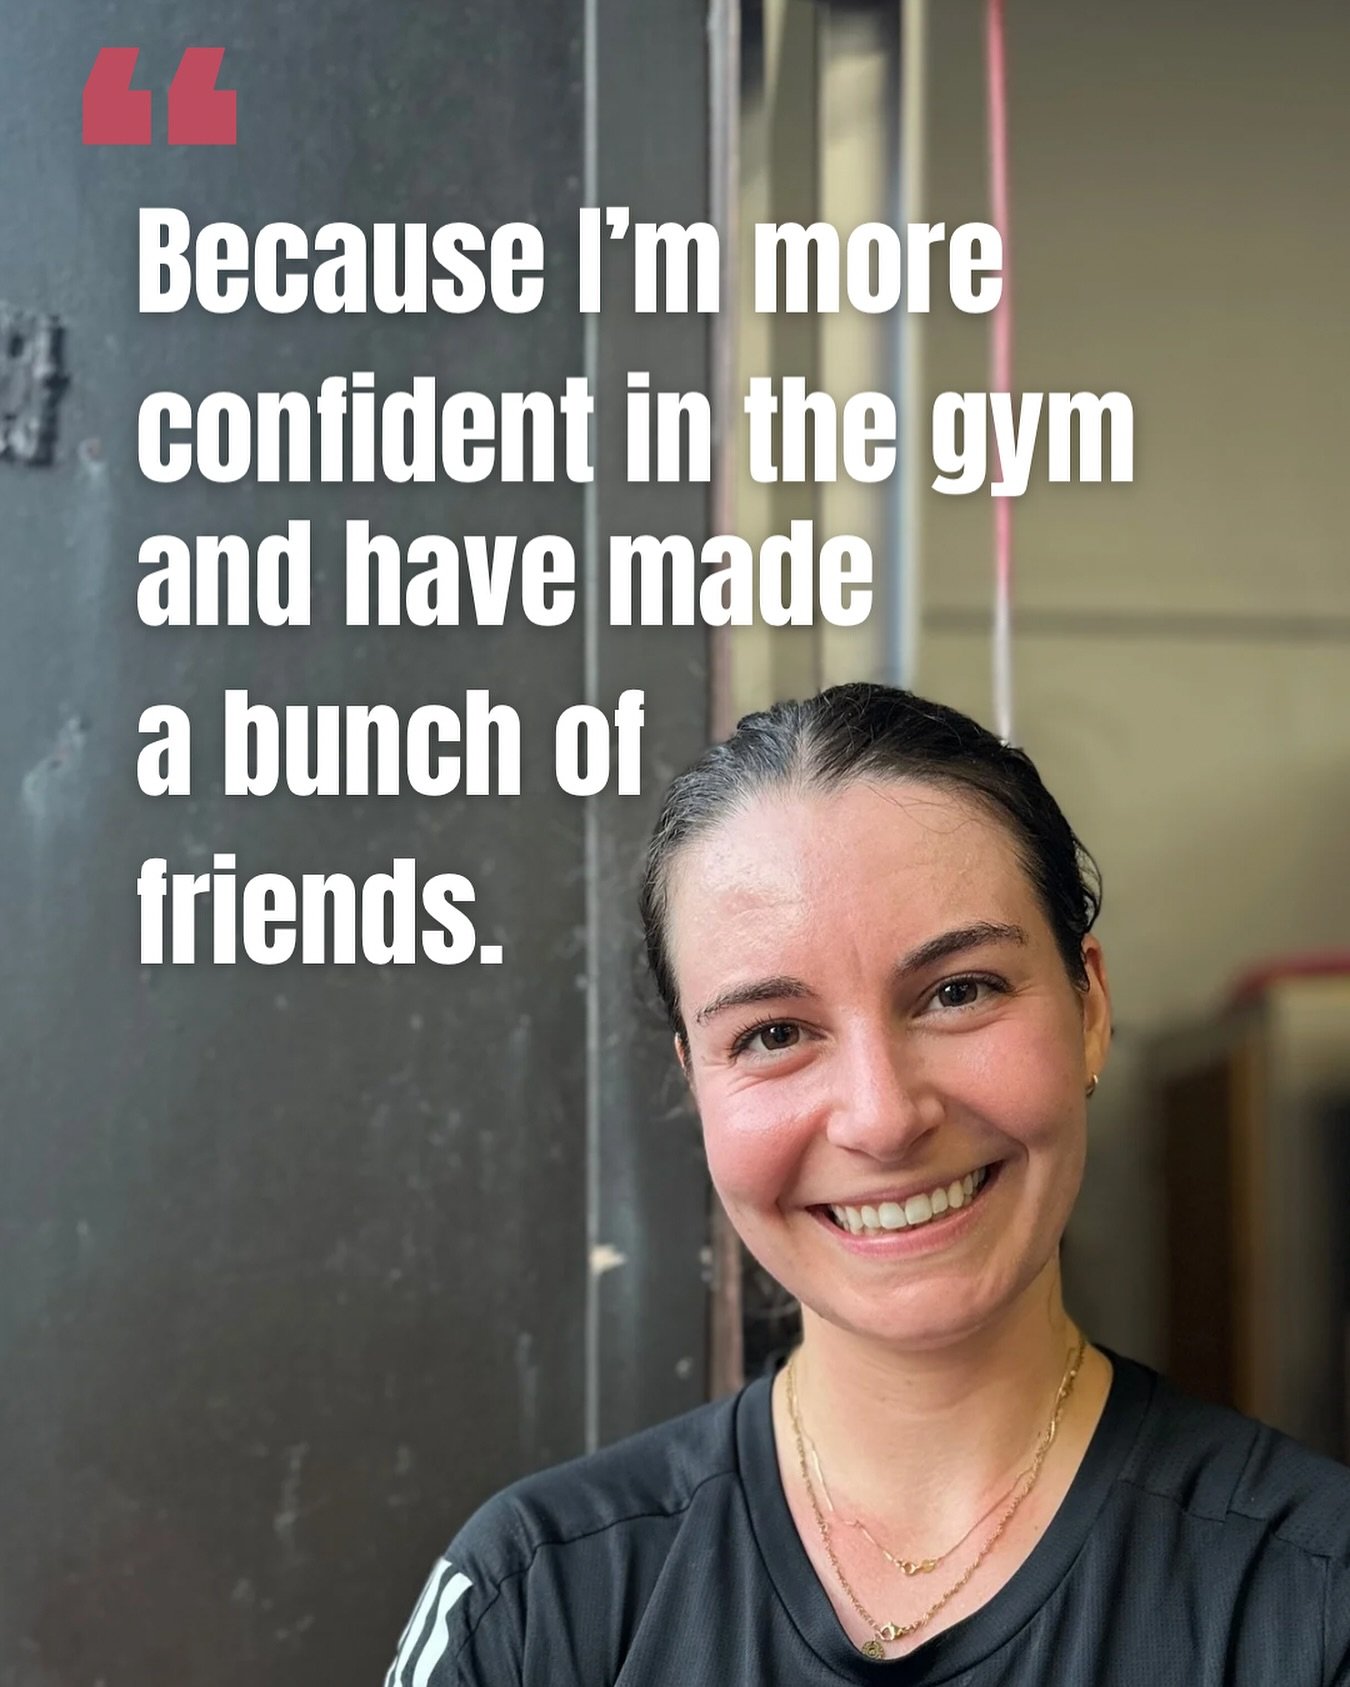 Why Monument Fitness? 

Introducing a new series where we get to know our members and why they choose to come back day after day. 

Emily, who has been a member for five months said,
&ldquo;Because I&rsquo;m more confident in the gym and have made a 